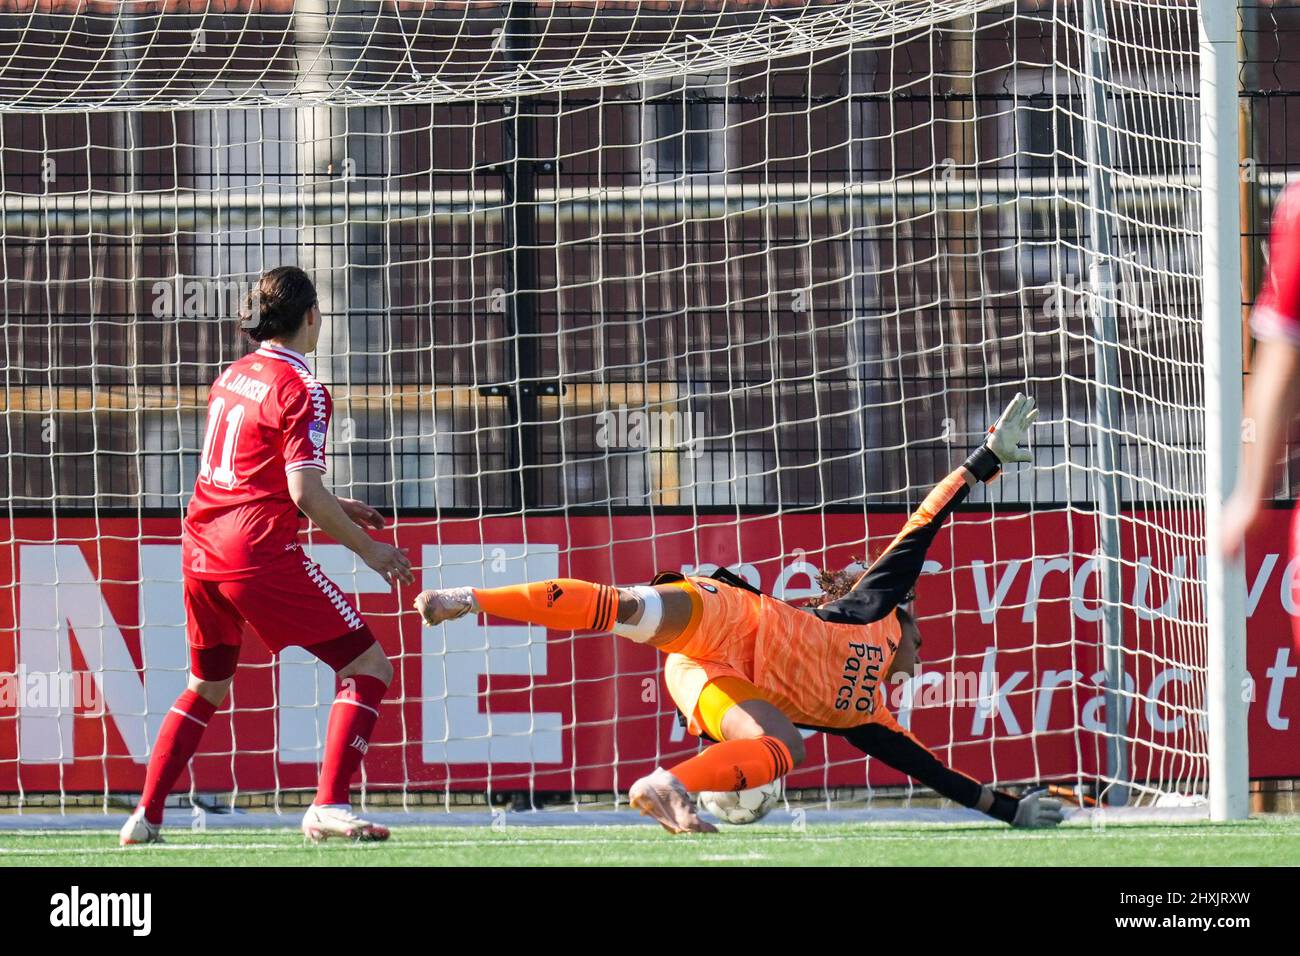 Enschede - Fenna Kalma of FC Twente Vrouwen scores the 3-0 during the match between FC Twente V1 v Feyenoord V1 at Sportcampus Diekman on 13 March 2022 in Enschede, Netherlands. (Box to Box Pictures/Yannick Verhoeven) Stock Photo